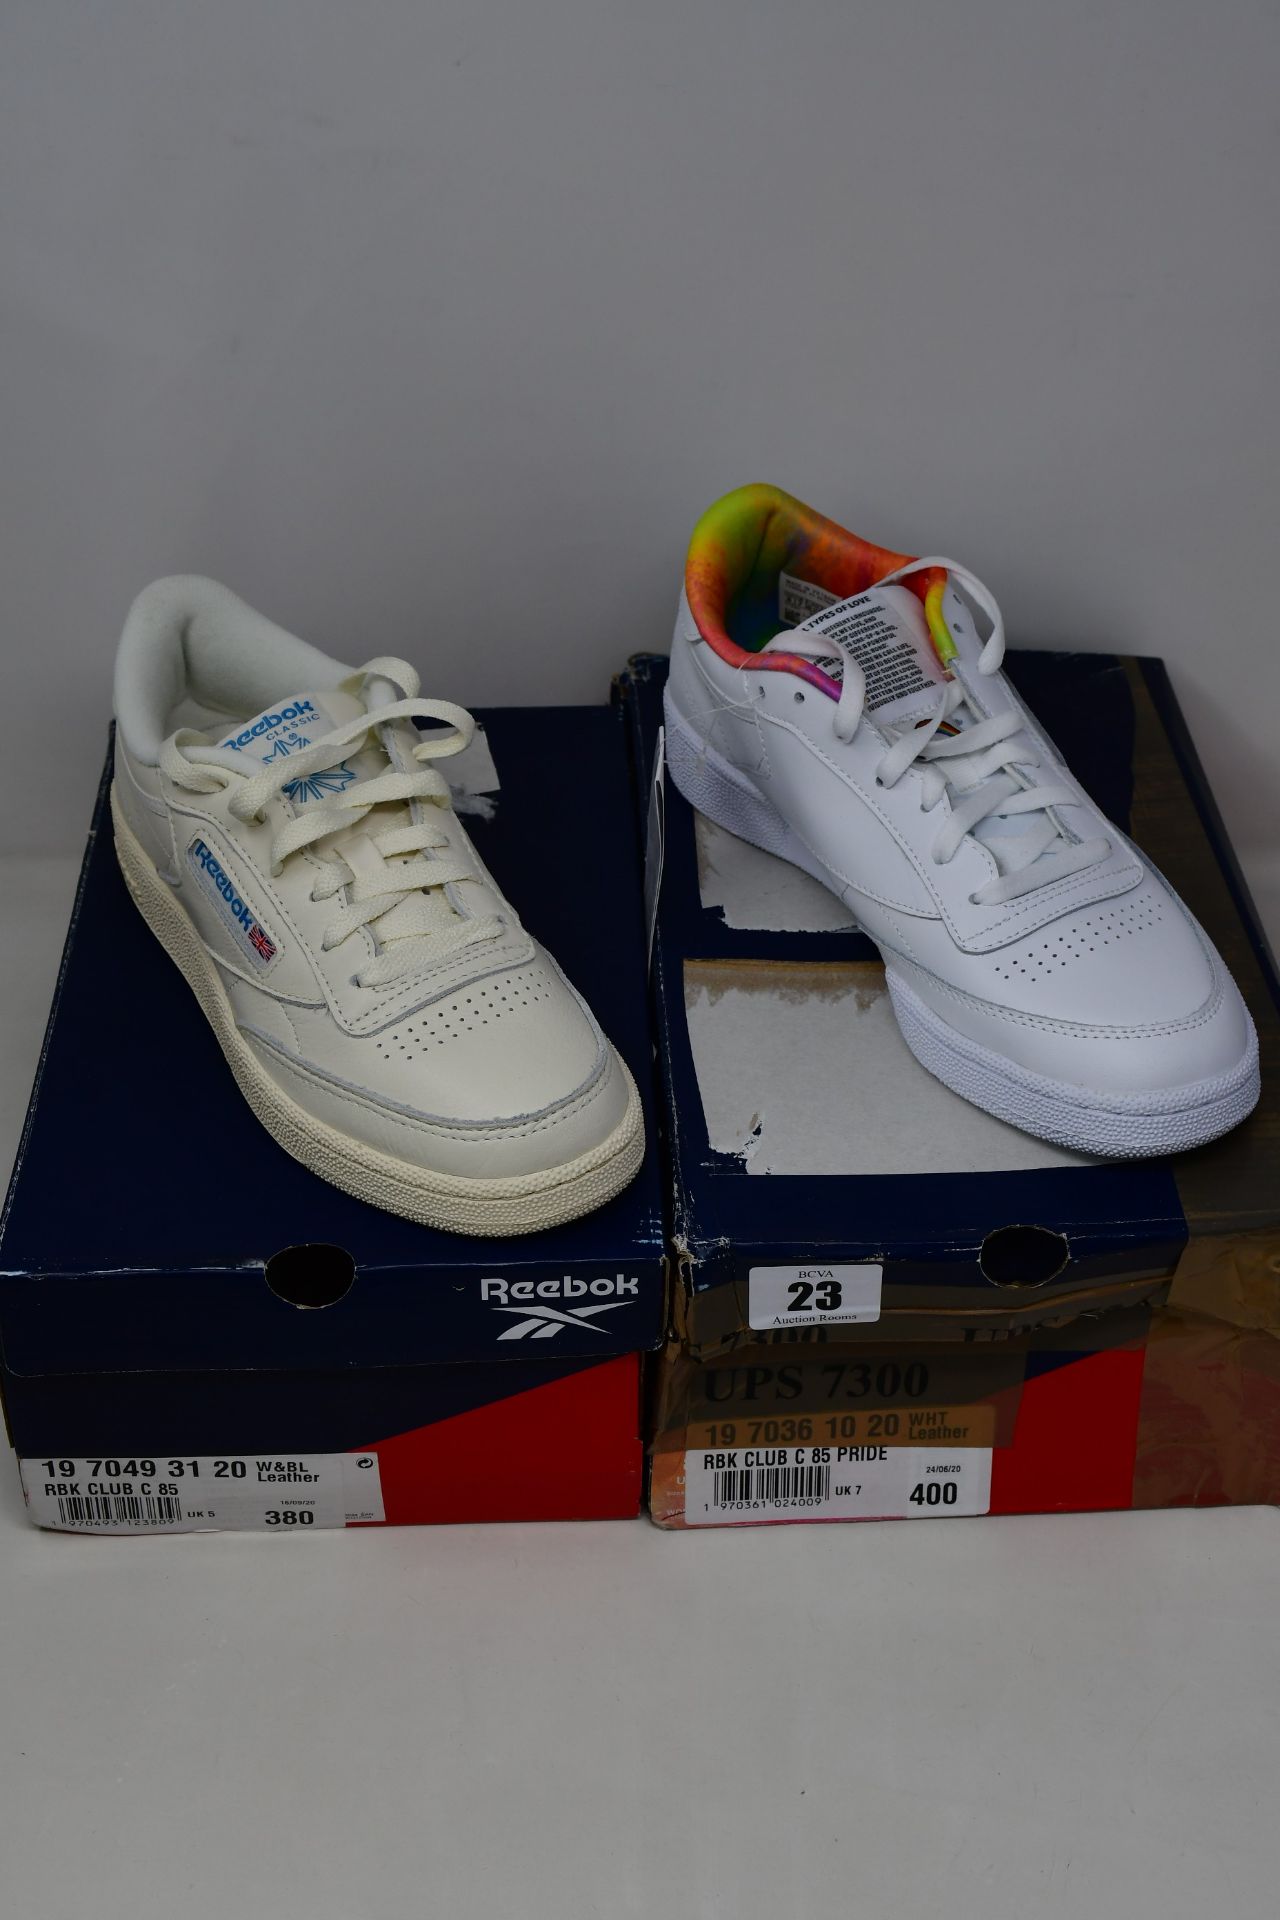 Two pairs of as new Reebok trainers; Club C 85 (UK 5) and Club C 85 Pride (UK 7).